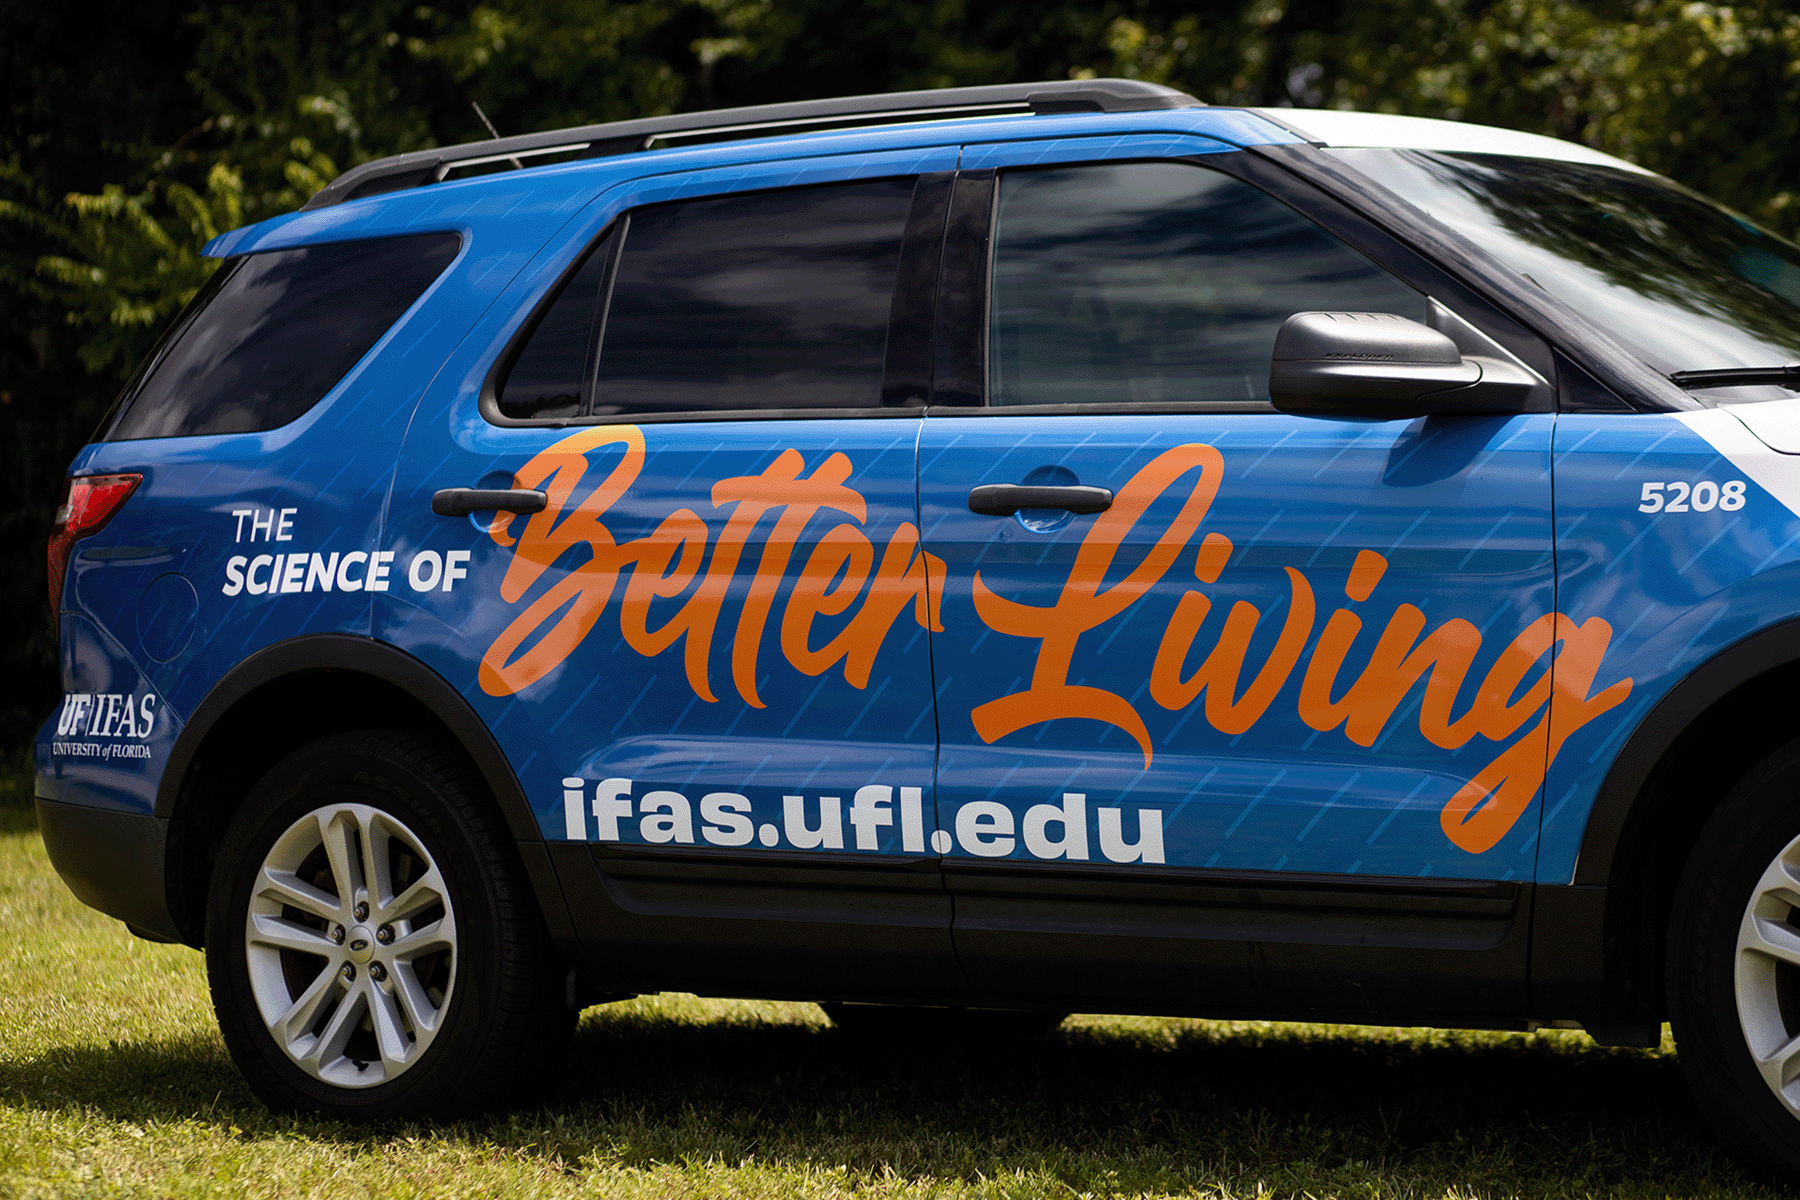 Ford Explorer with new Science of Better Living vehicle wrap.